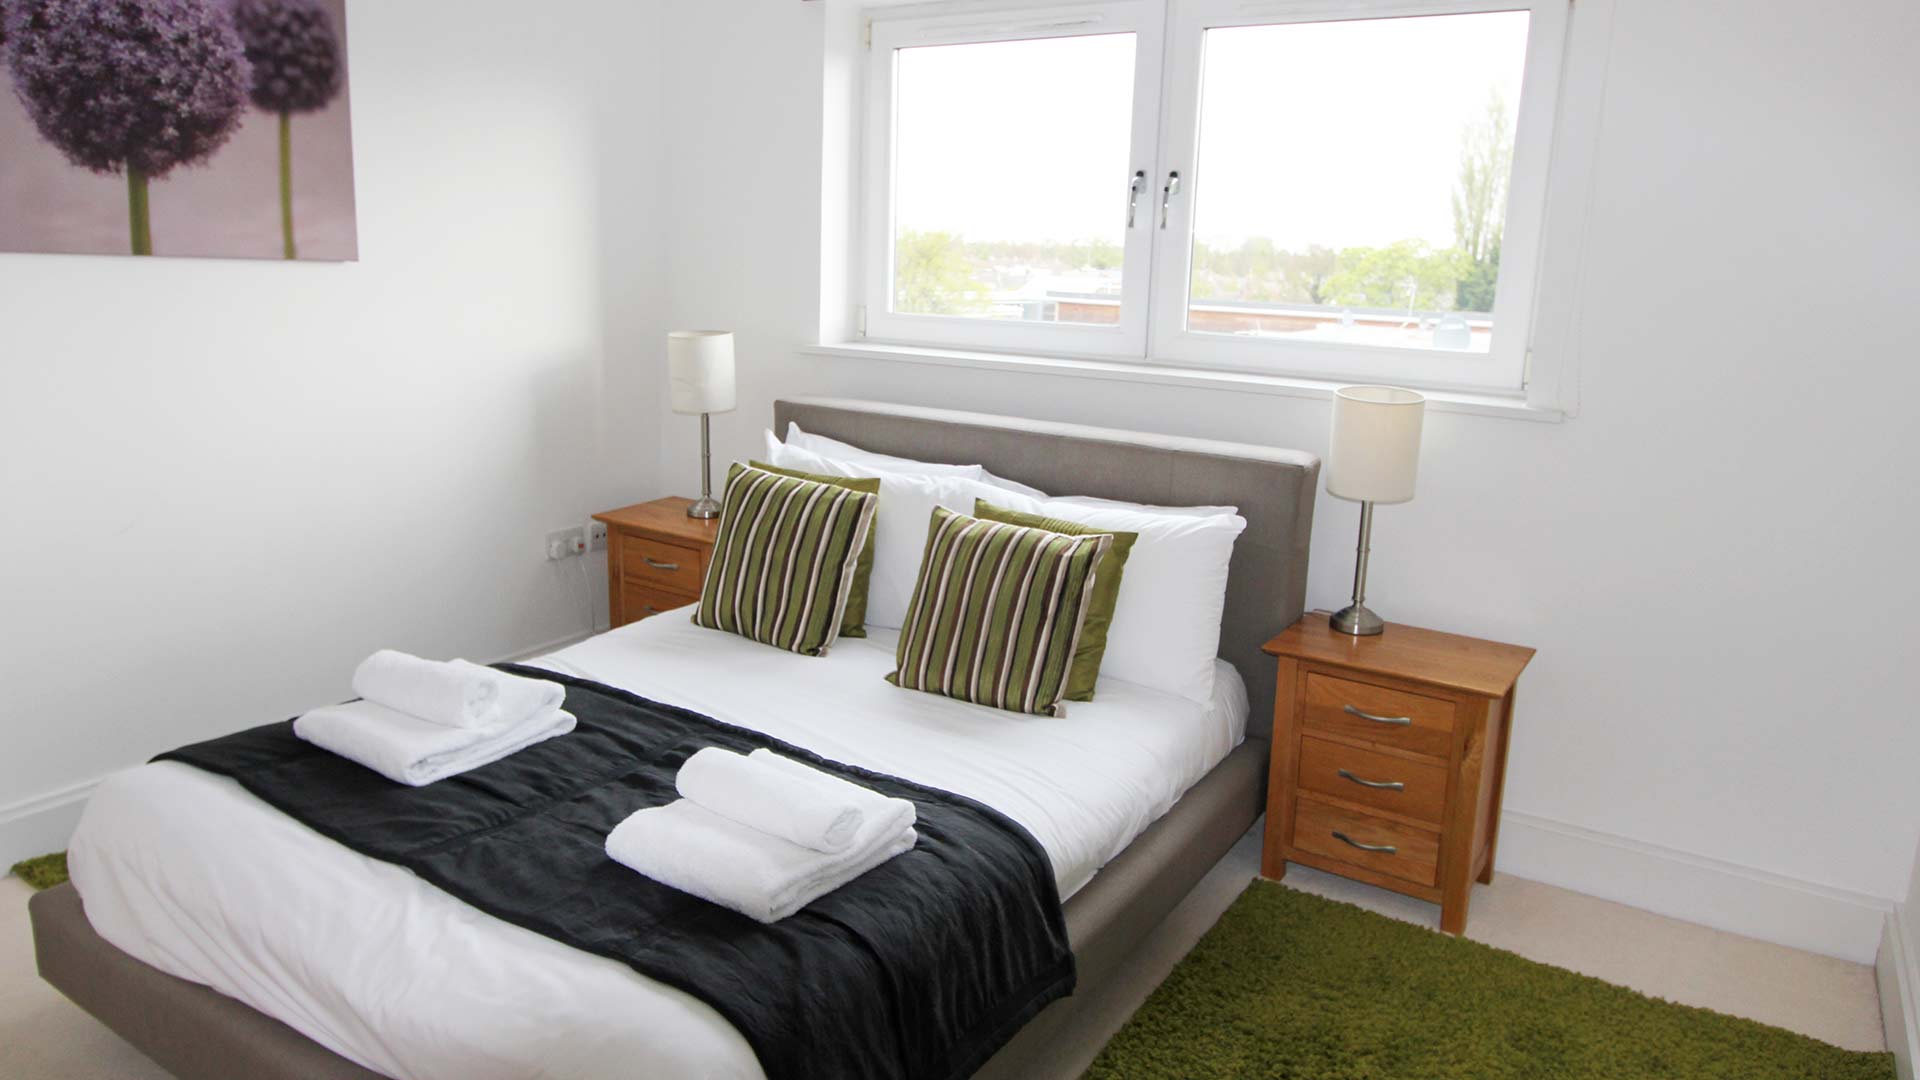 Looking-for-affordable-apartments-in-Cambridge?-why-not-book-our-Chesterton-Serviced-Apartments-in-Cambridge?-call-today-for-great-rates.